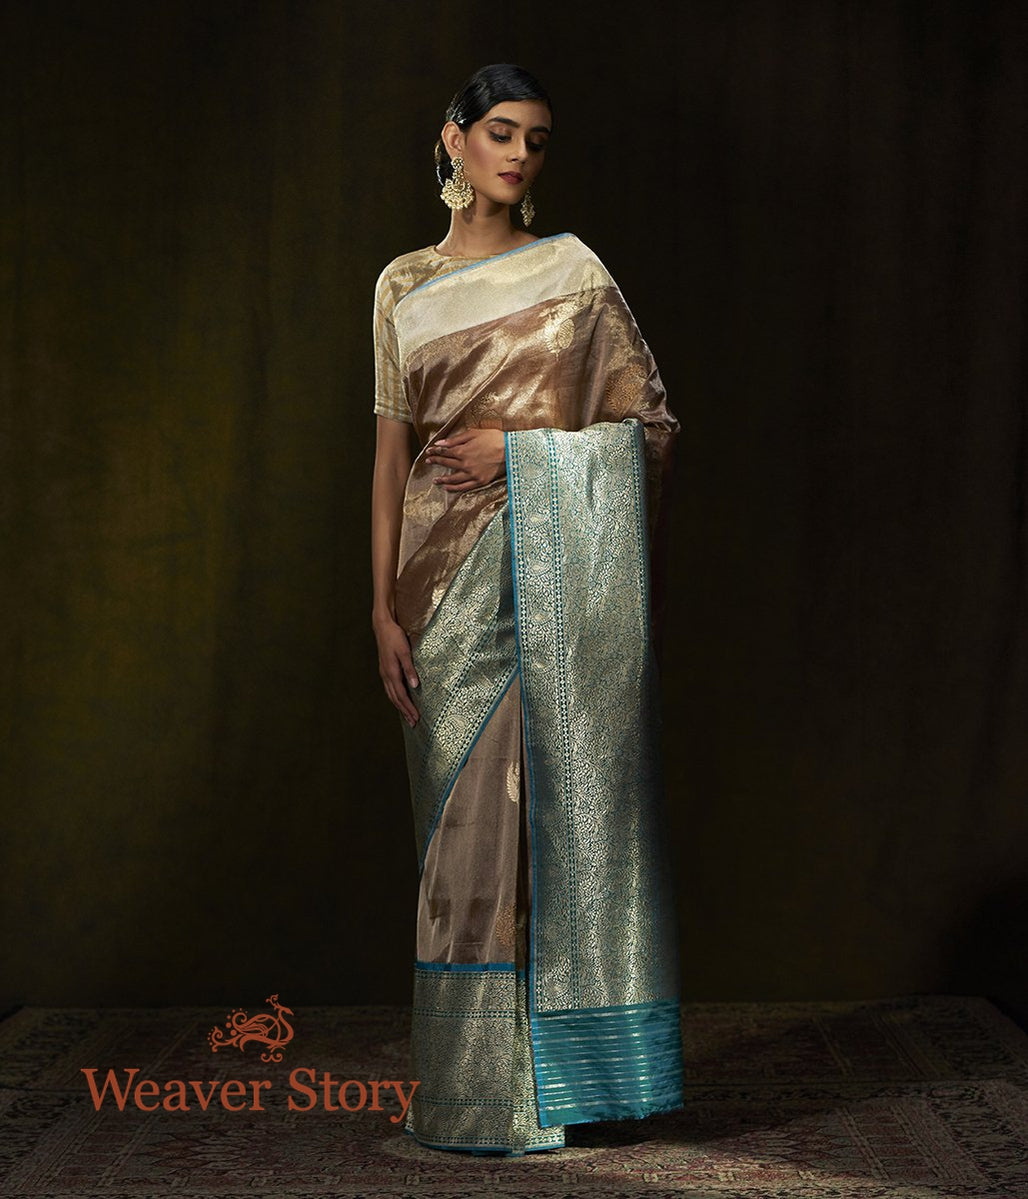 Handwoven_Copper_and_Brown_Tone_Silk_Tissue_Saree_WeaverStory_01